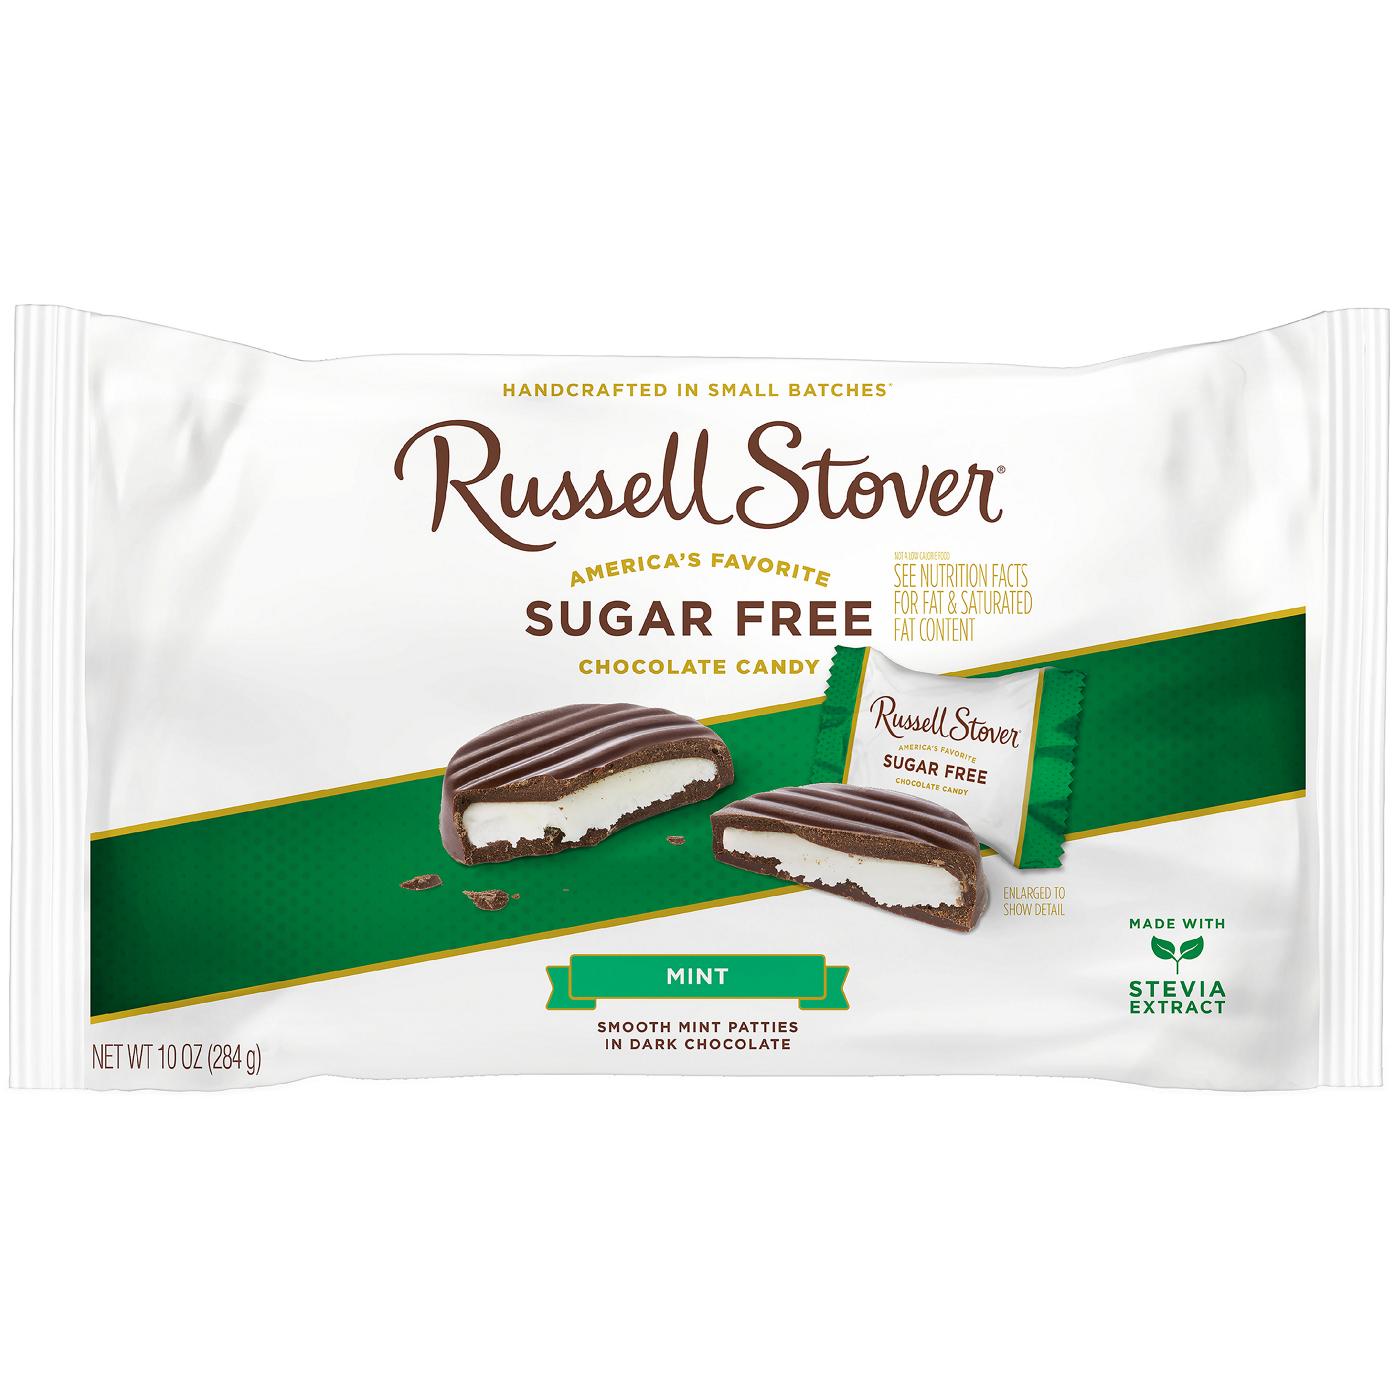 Russell Stover Sugar Free Mint Patties; image 1 of 5